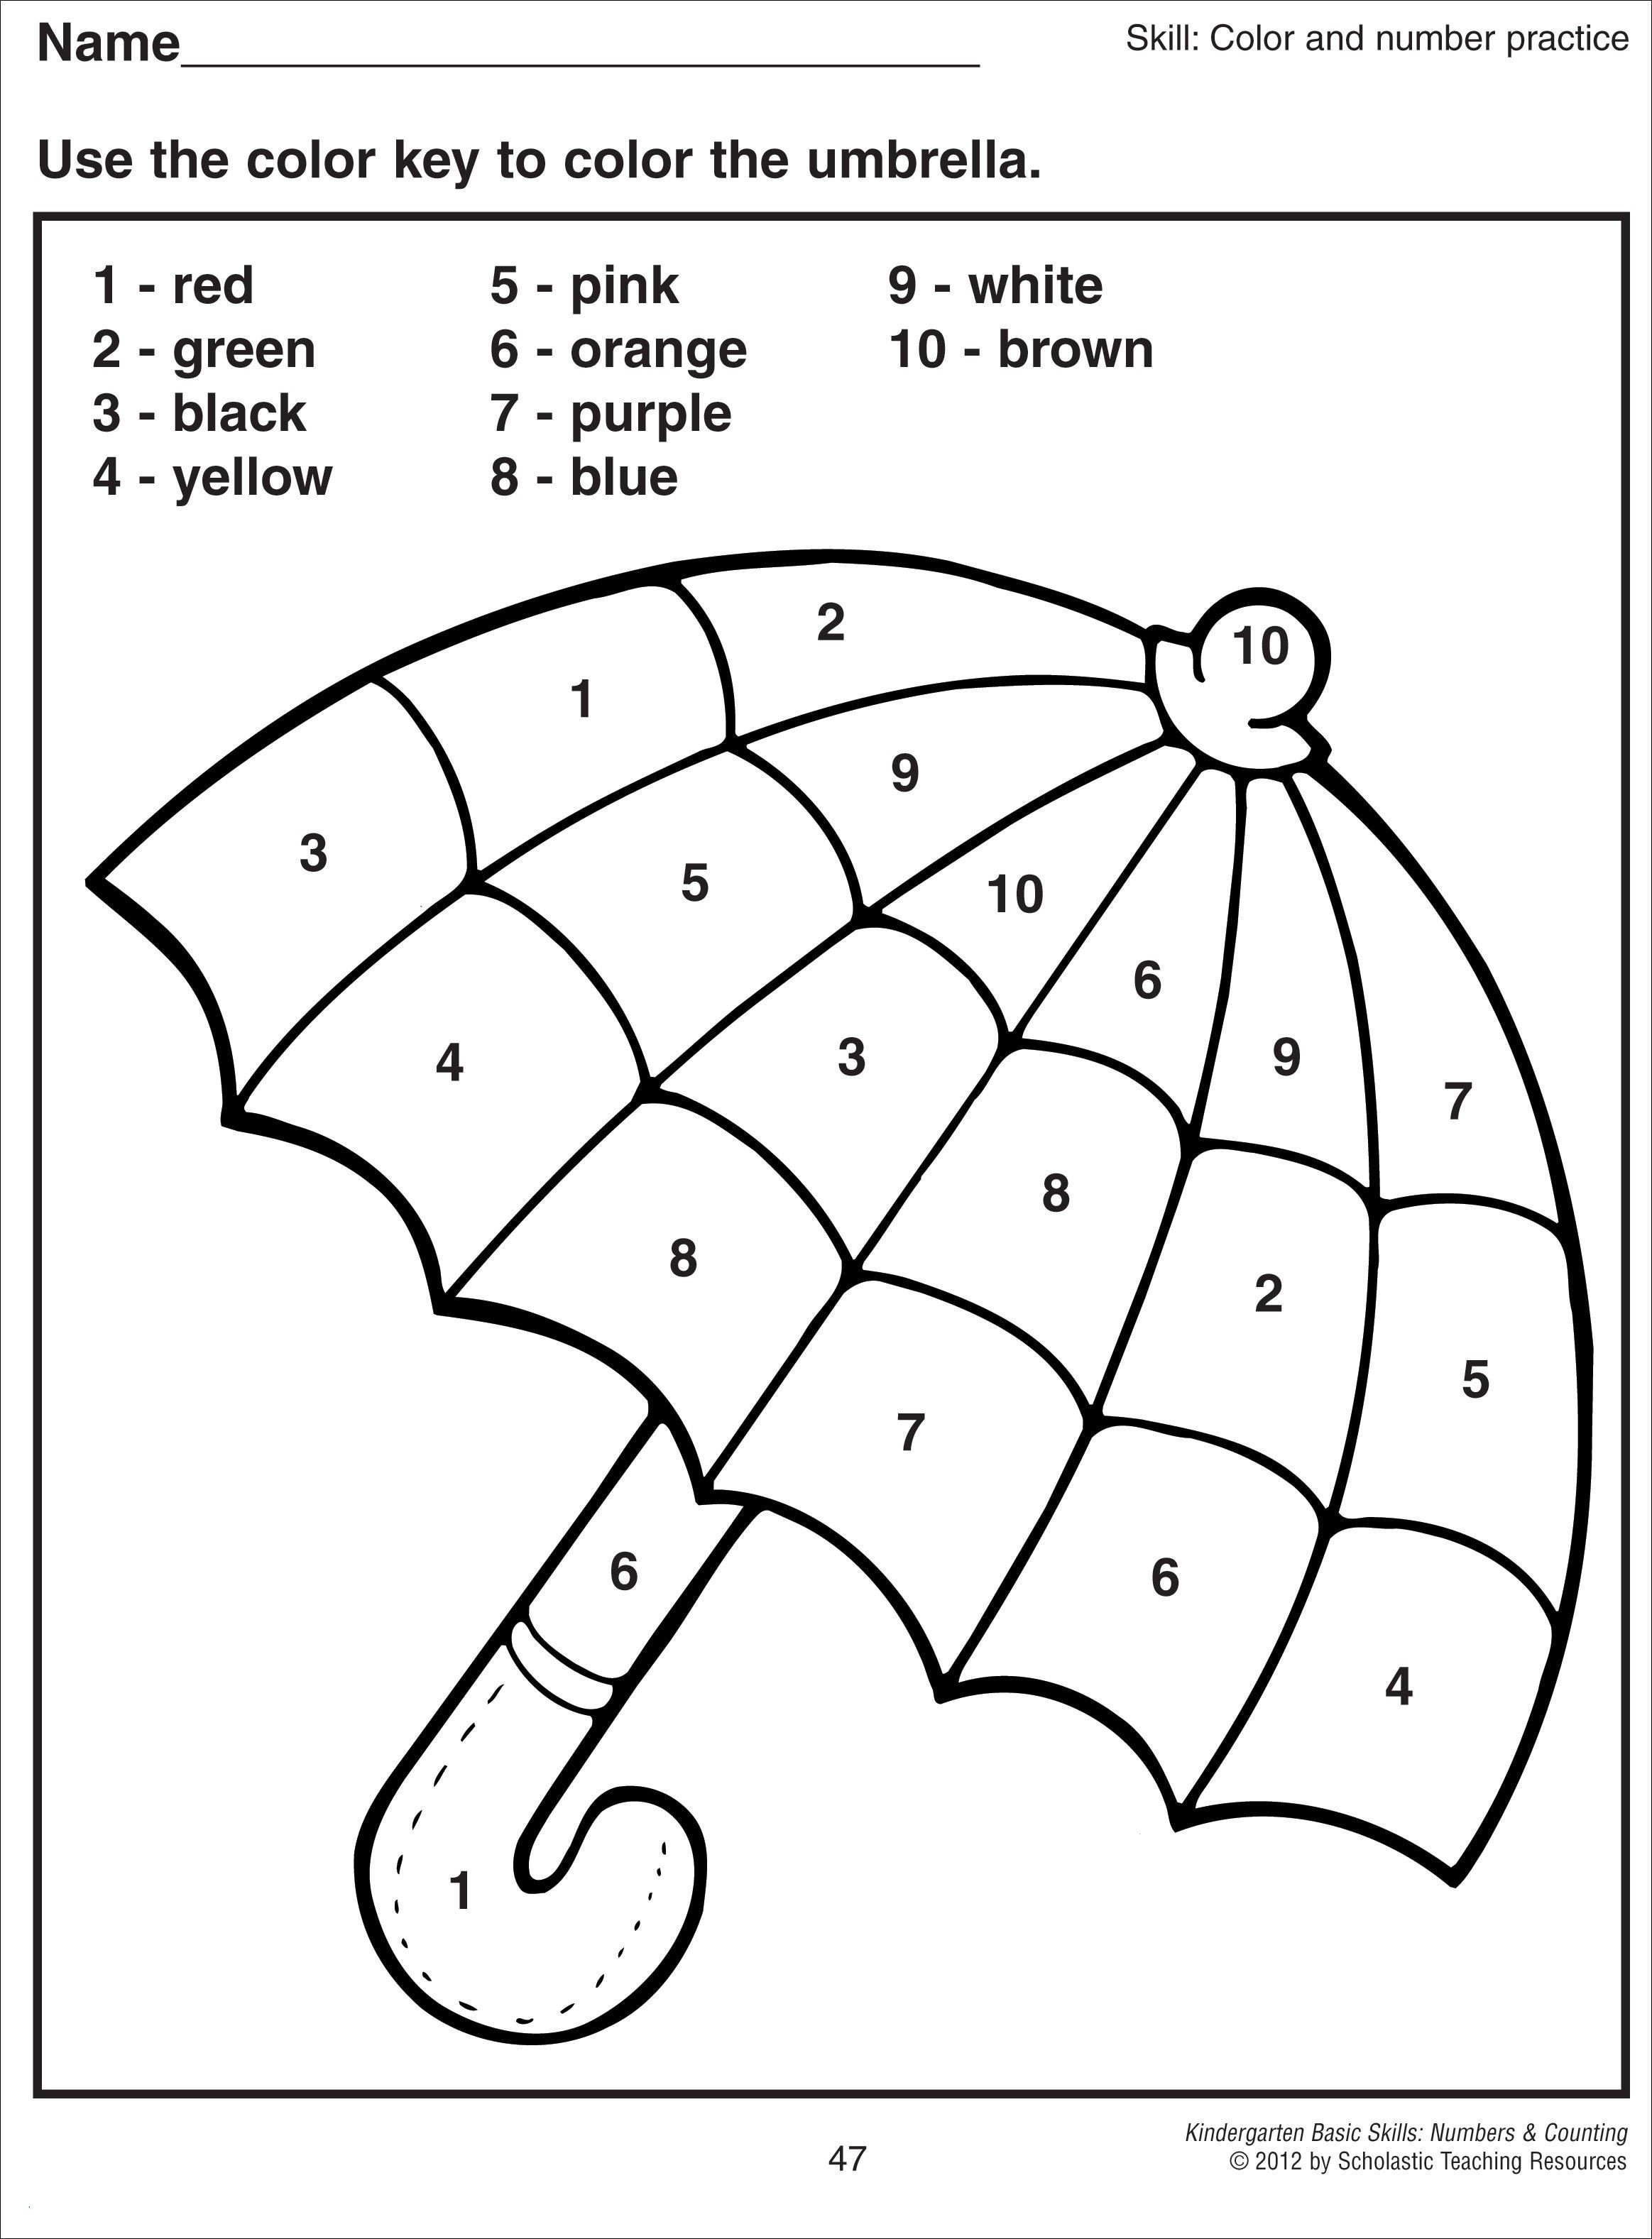 Name Coloring Page 27 Customized Coloring Pages With Names On It Download Coloring Sheets